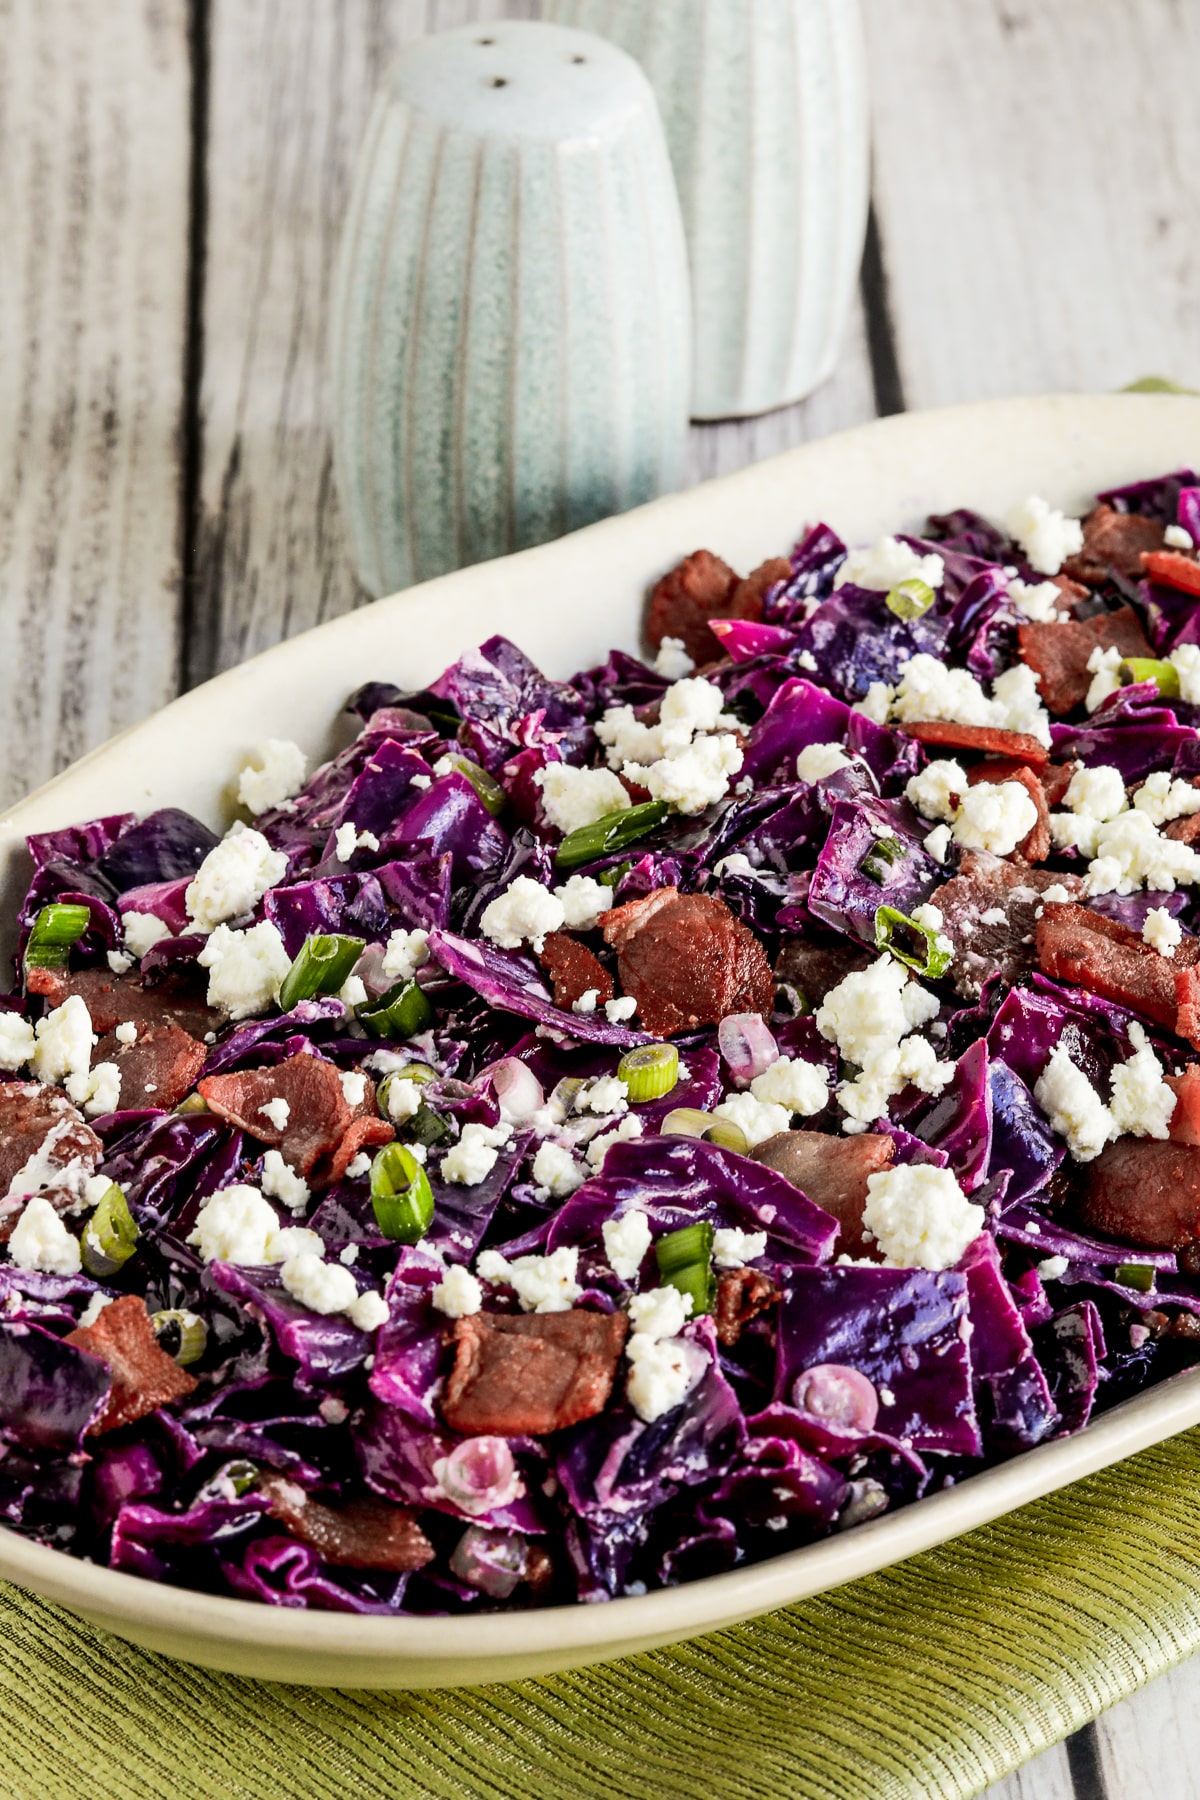 Red Cabbage Salad with Bacon and Goat Cheese shown on serving plate